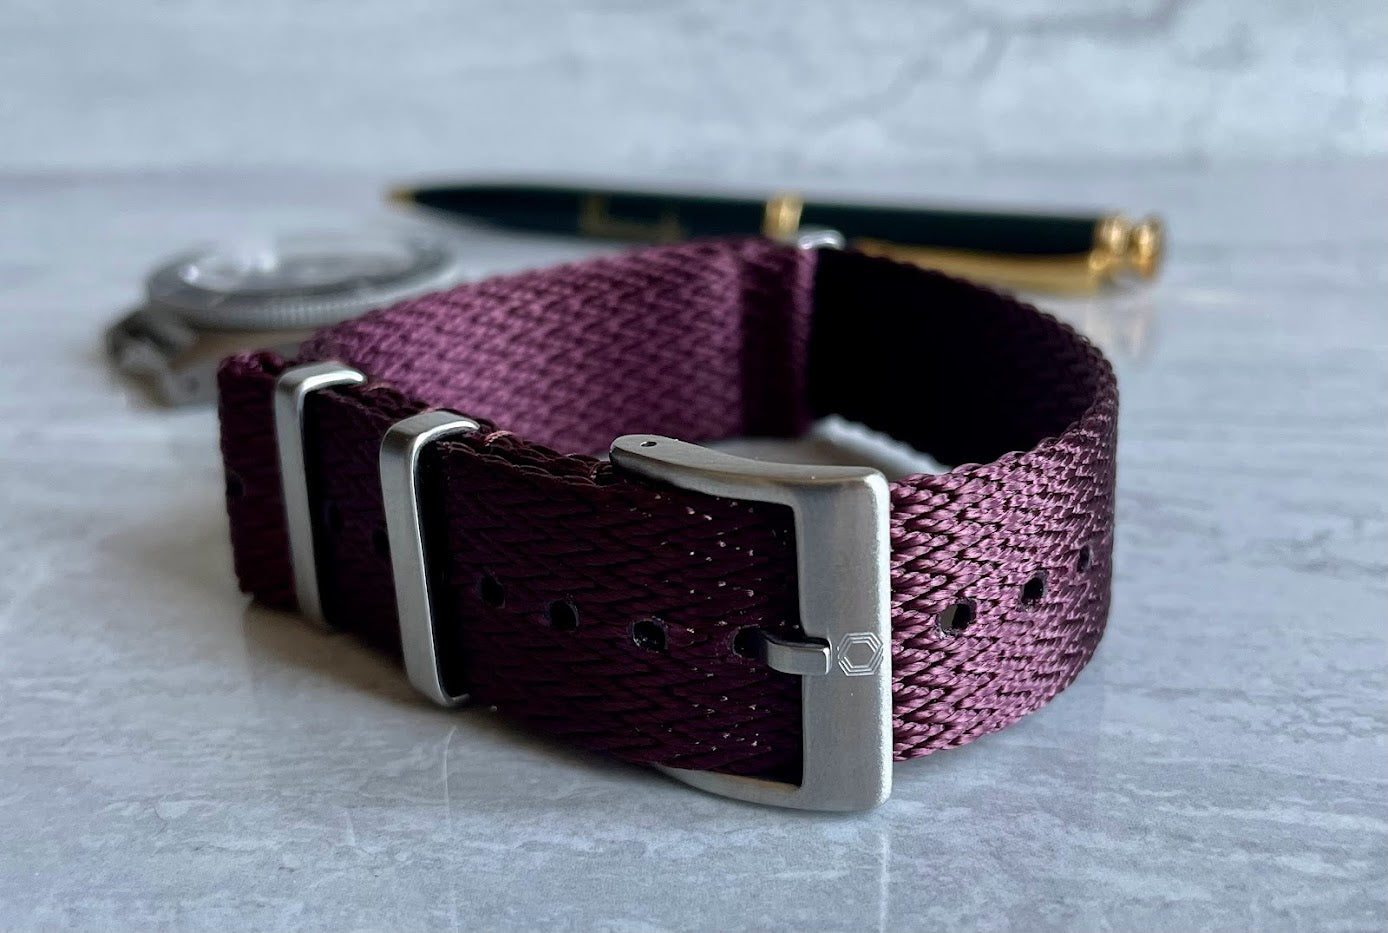 The 'Regal Eagle' - Maroon Herringbone patterned military watch strap made of a soft nylon